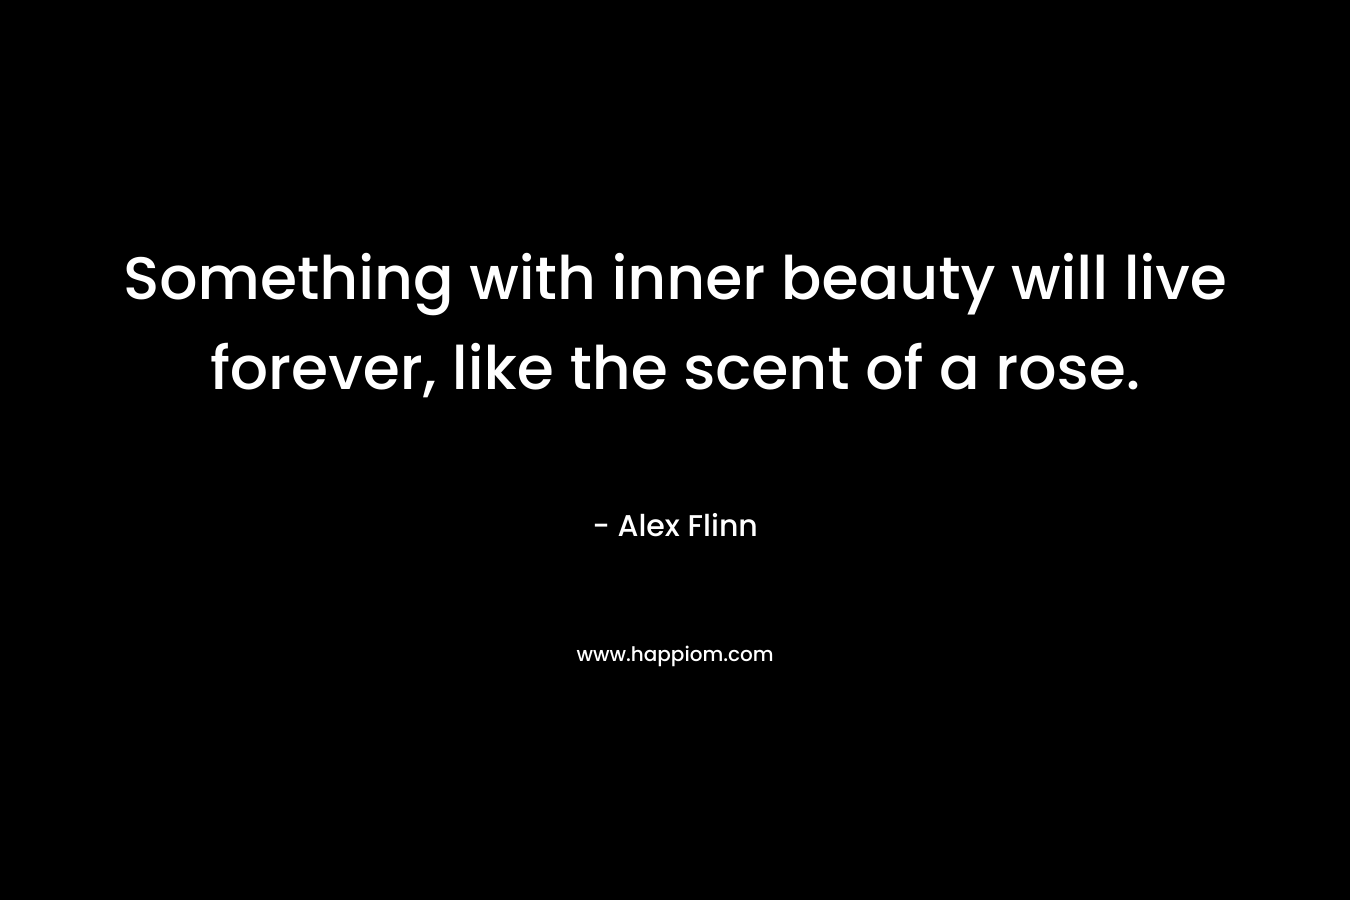 Something with inner beauty will live forever, like the scent of a rose. – Alex Flinn